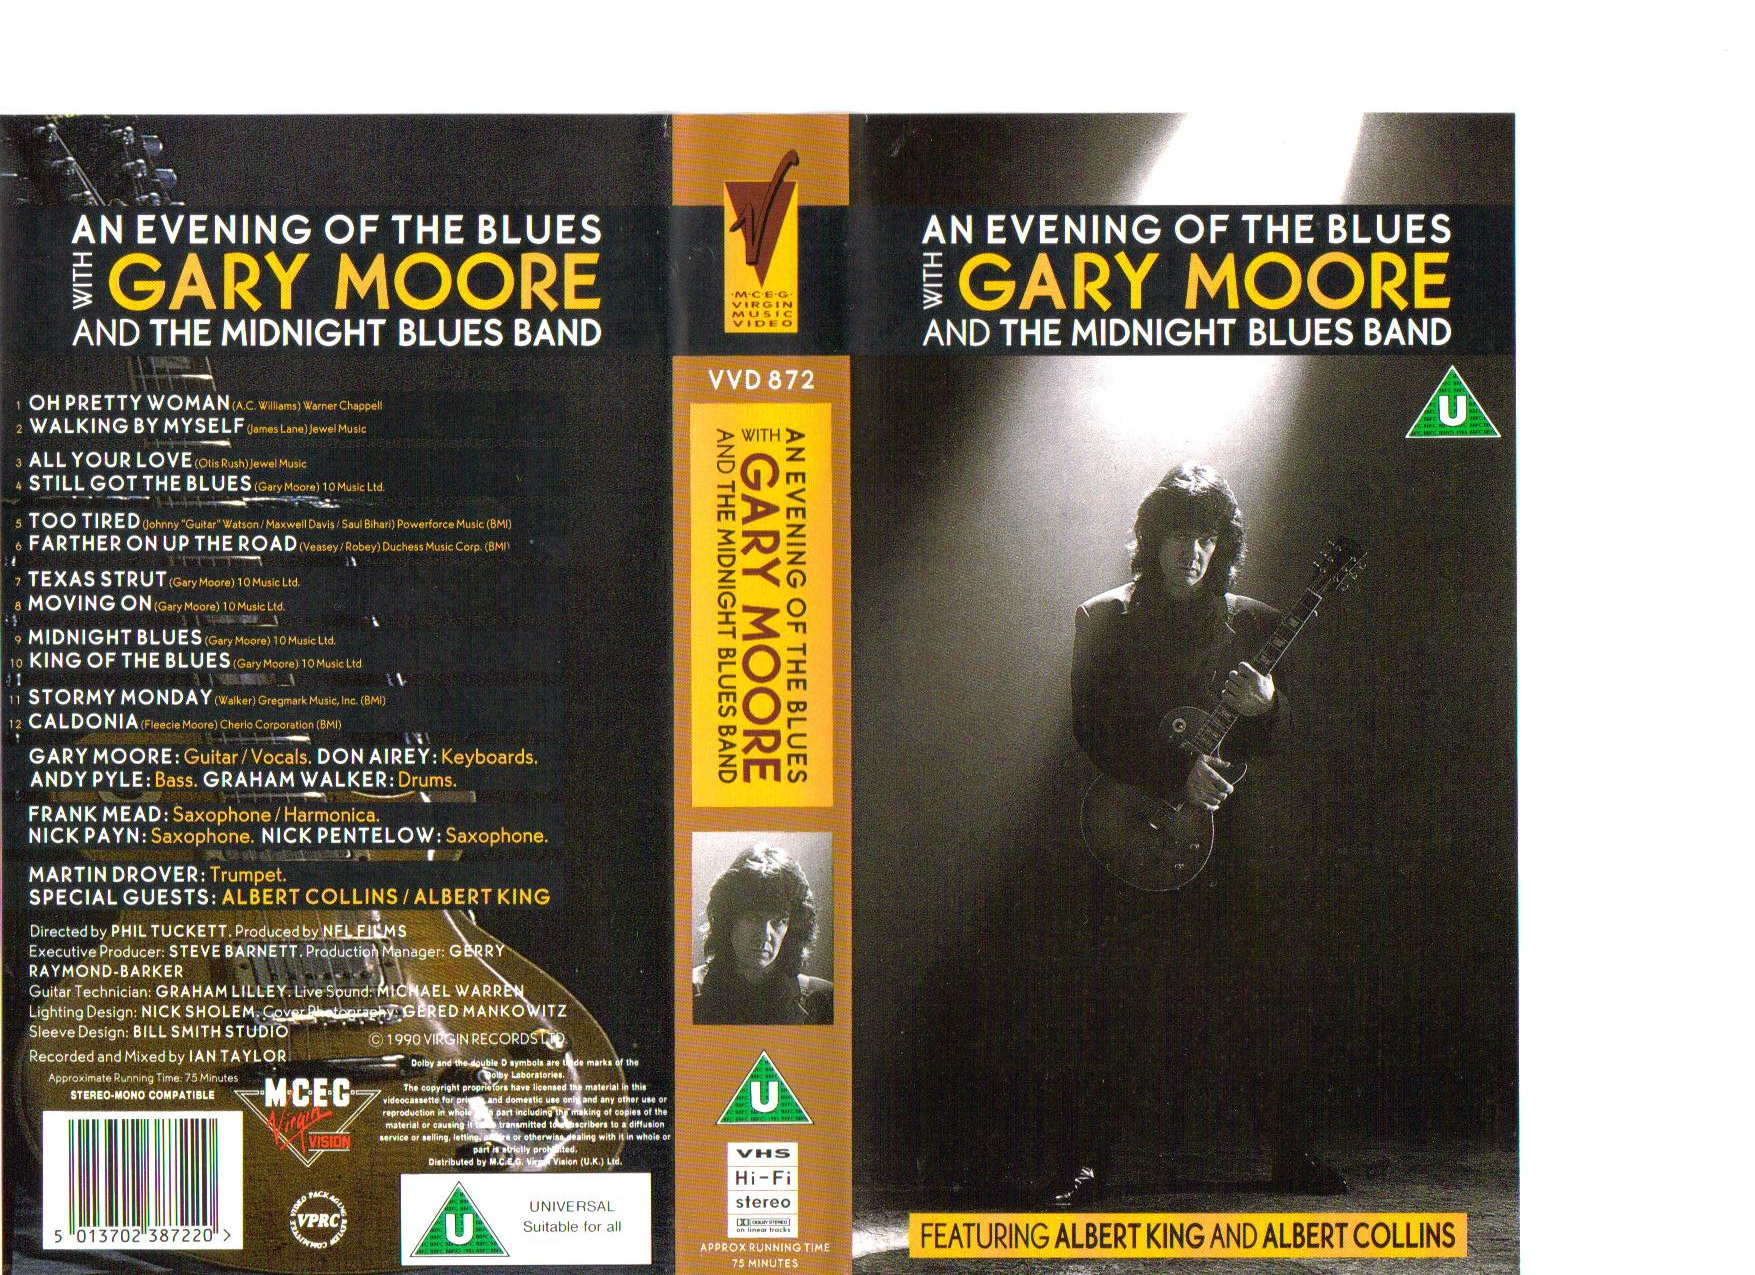 Gary Moore & Friends - An evening of the blues